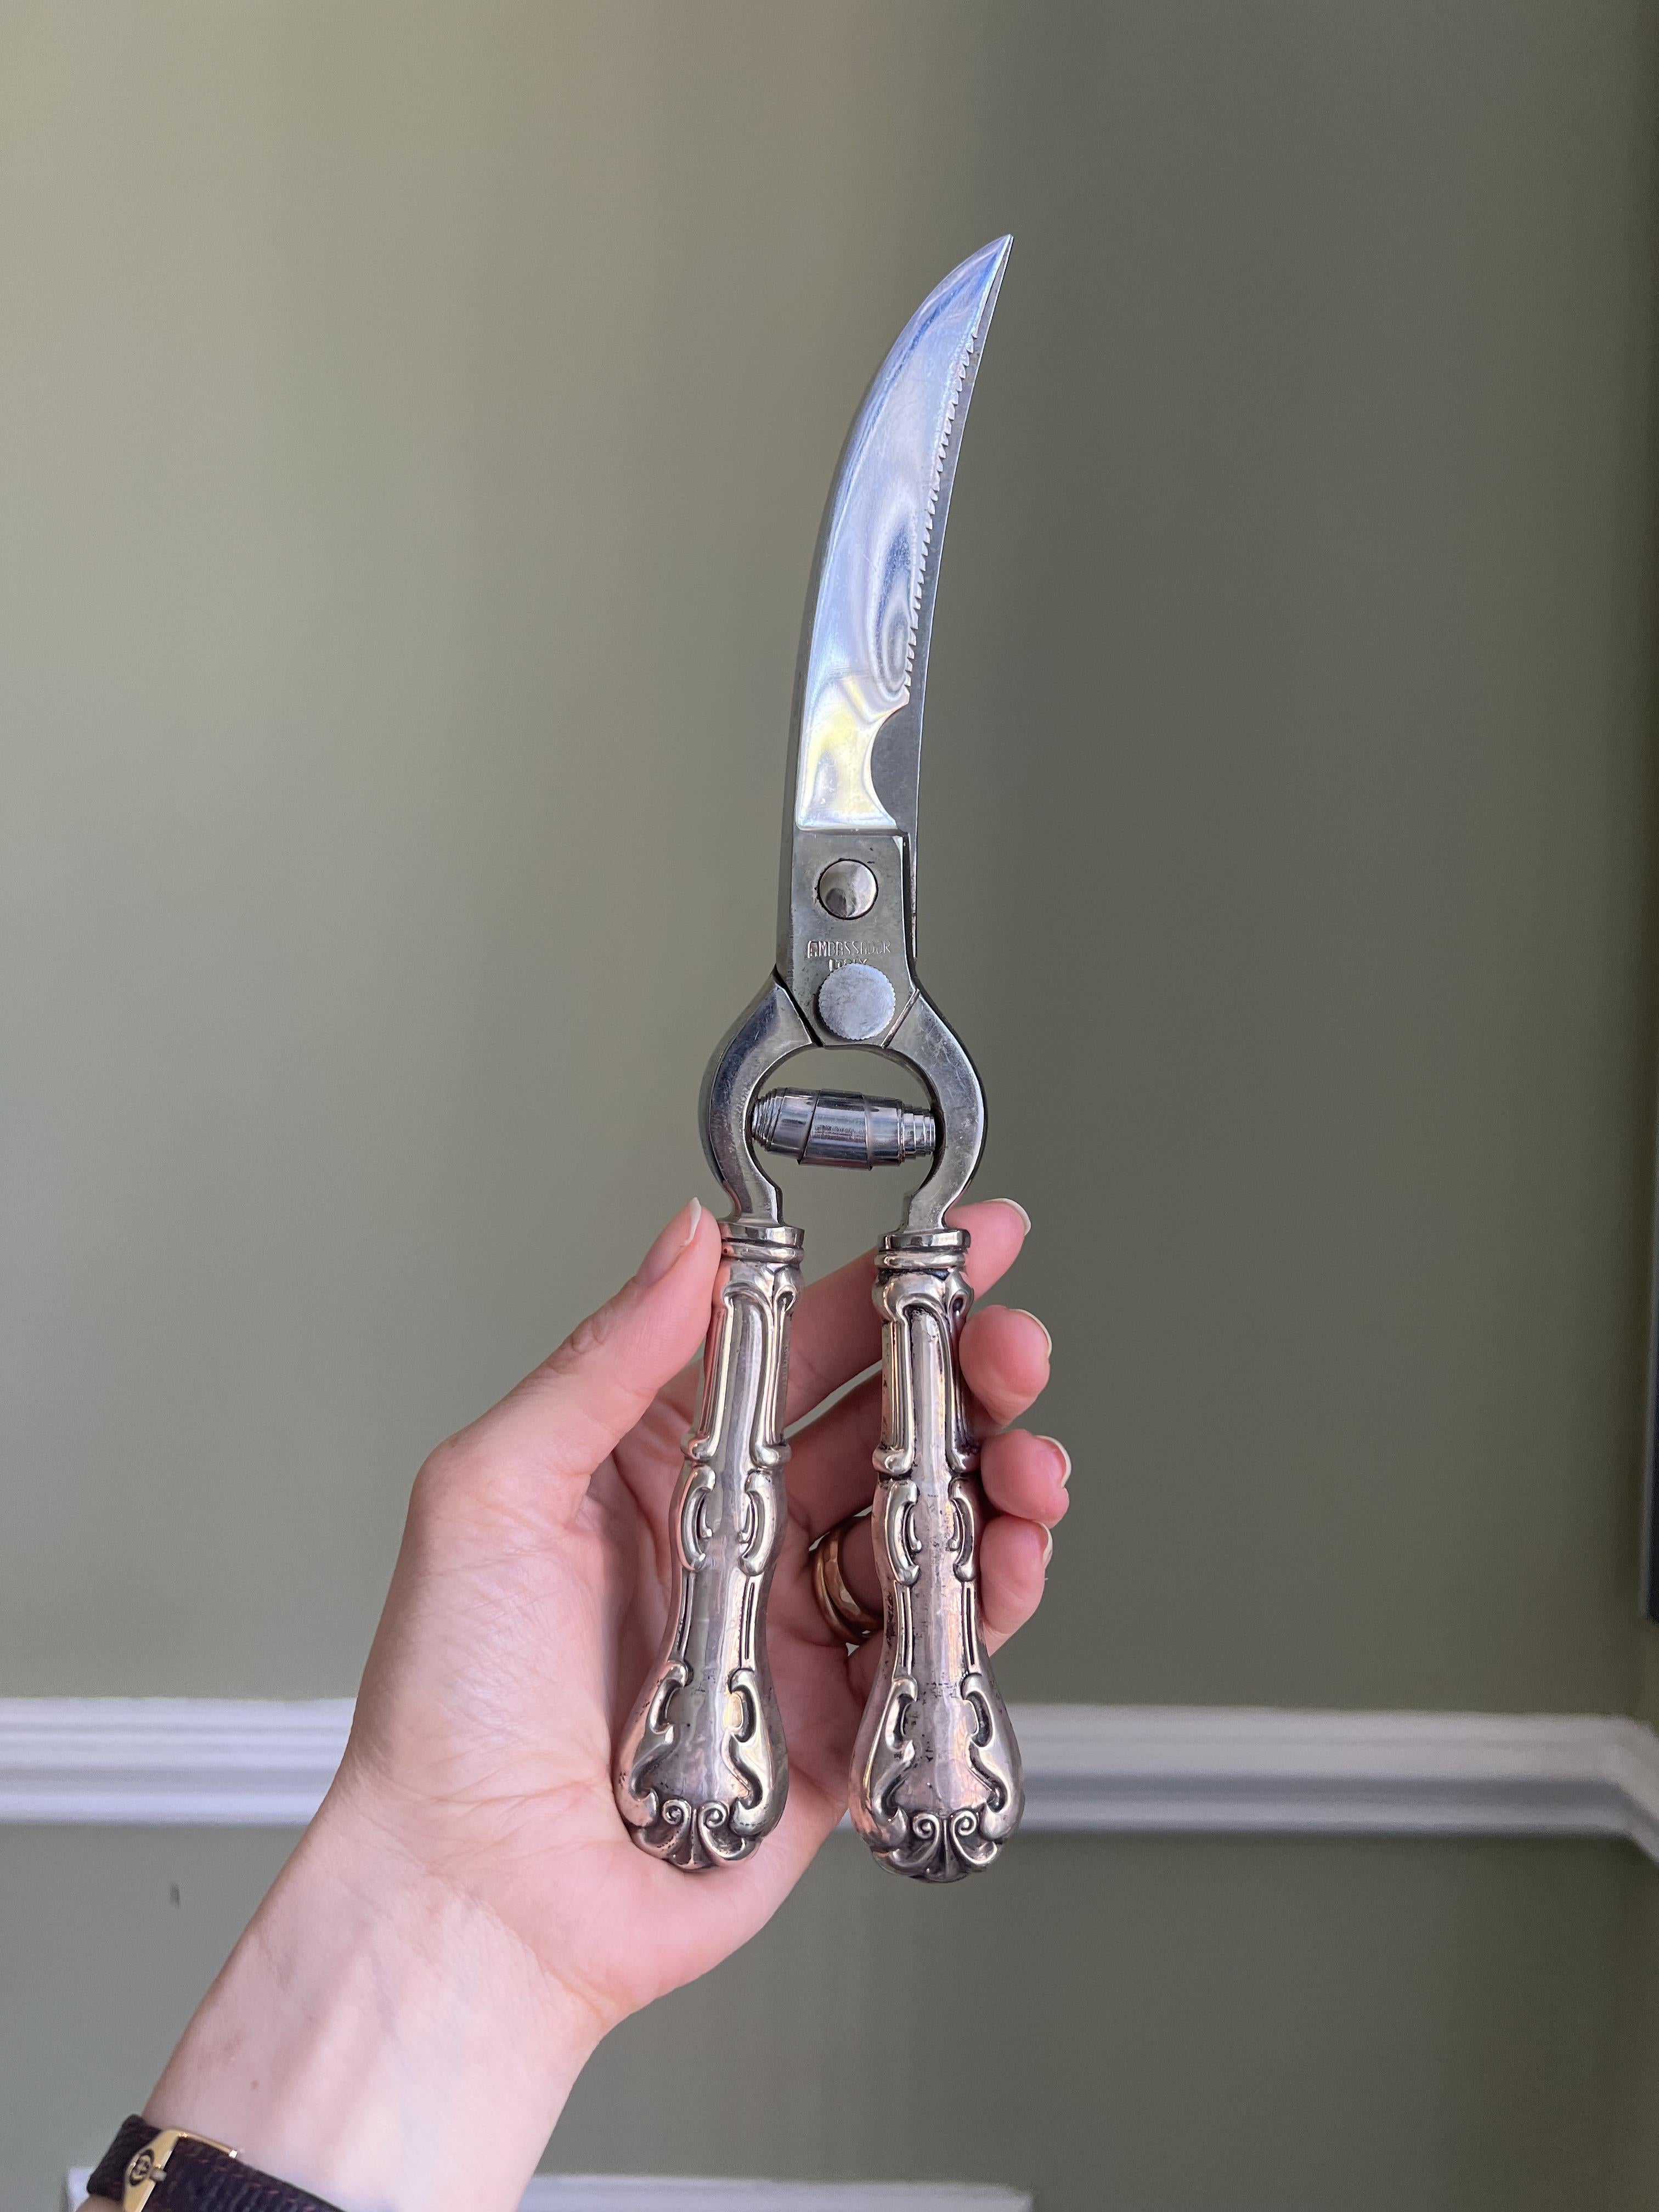 Mr. Giallo is opening his personal vault to sell a collection of his treasured antiques he's held on for so long.

About item:
Incredible Italian silver scissors that were once used for poultry when they originally came out. For yourself or a